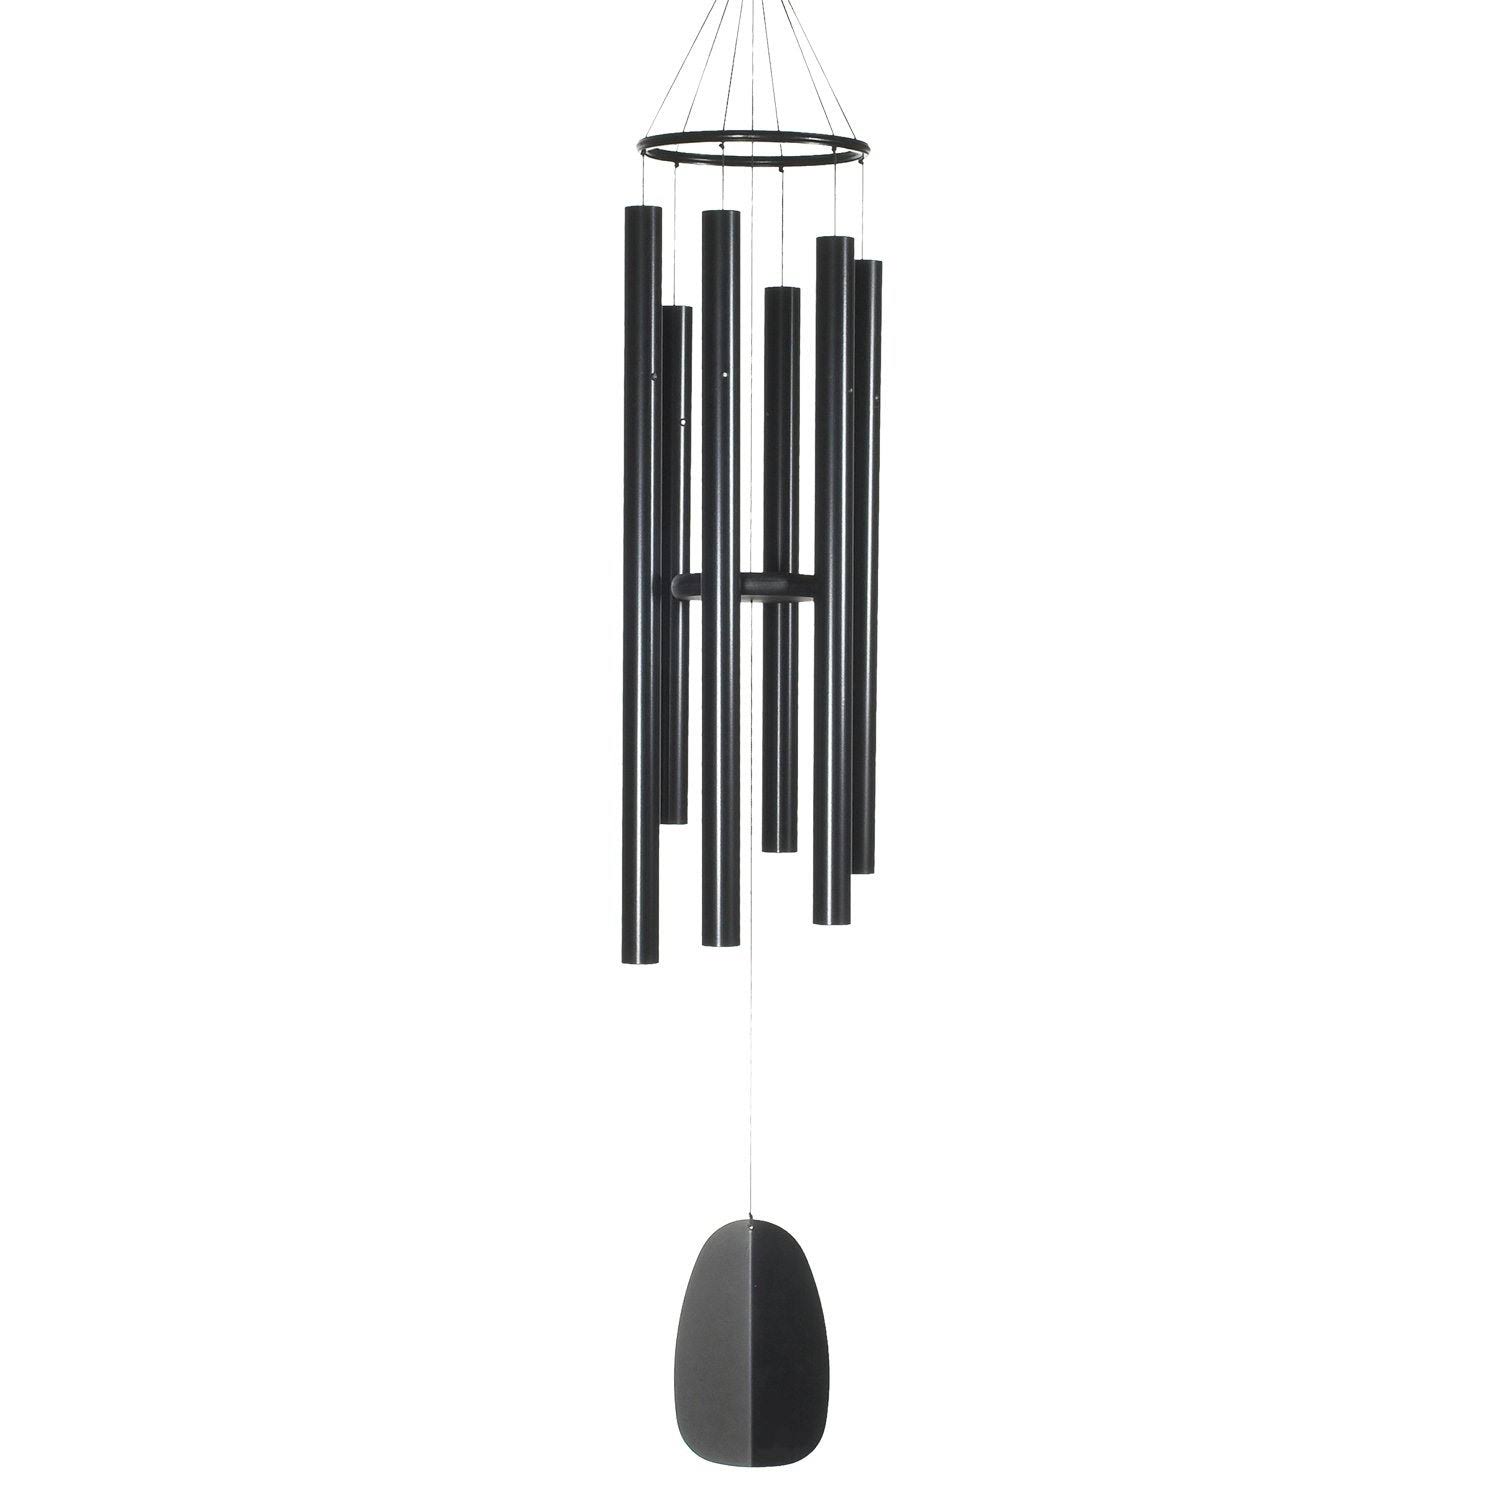 Woodstock Chimes Bells of Paradise - Black, 54 Inches